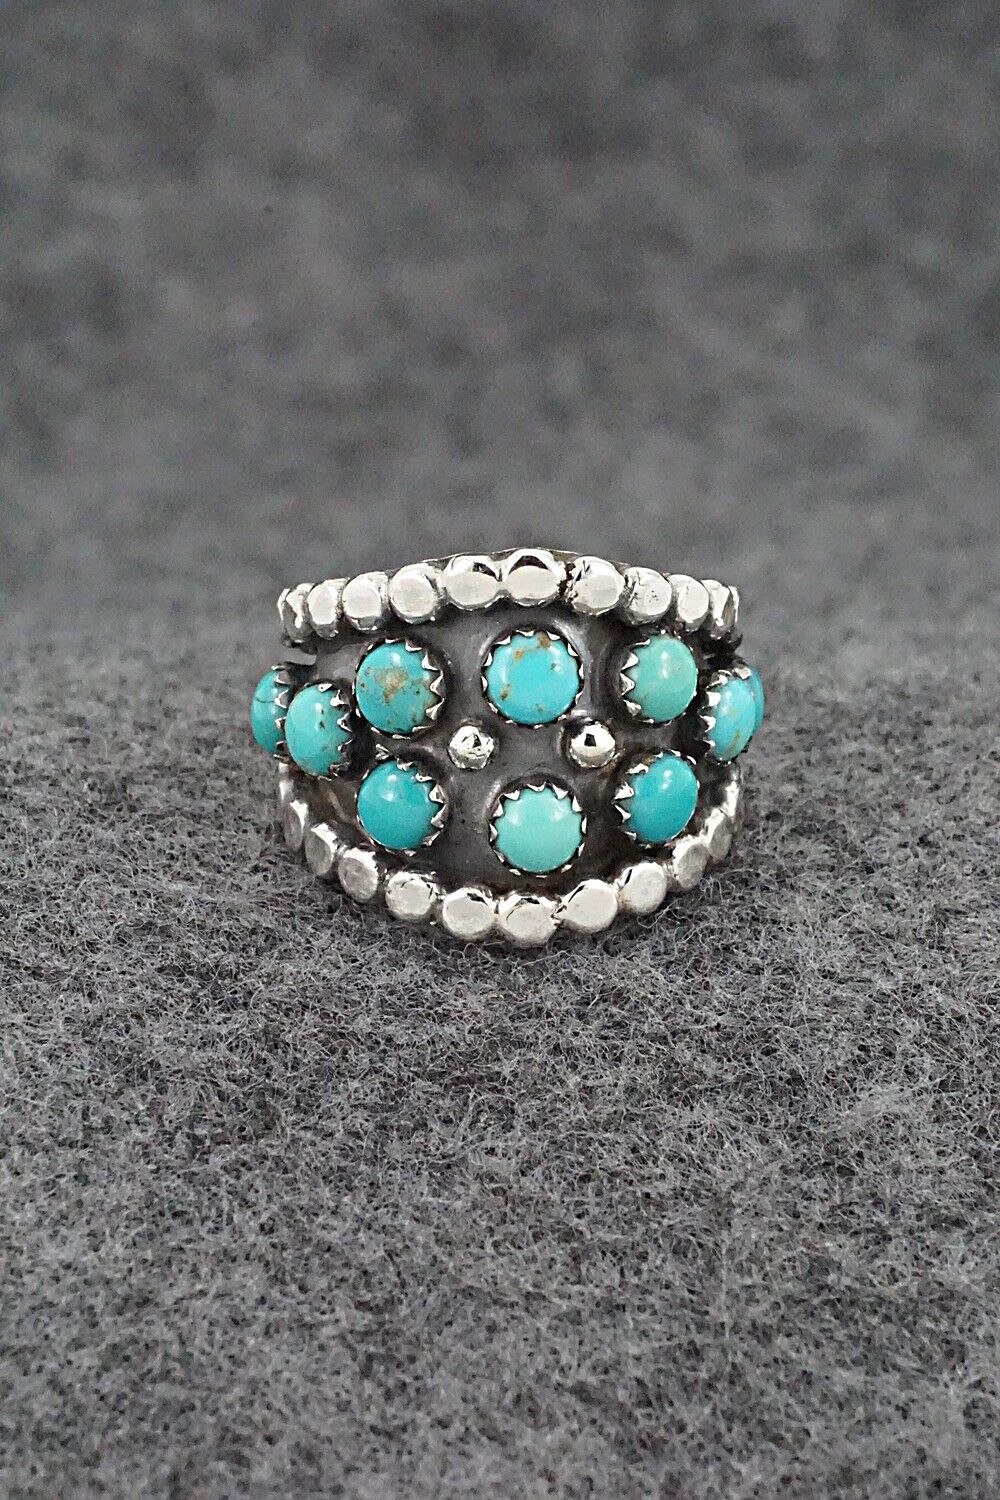 Turquoise & Sterling Silver Ring - Kenny Lonjose - Size 5.5